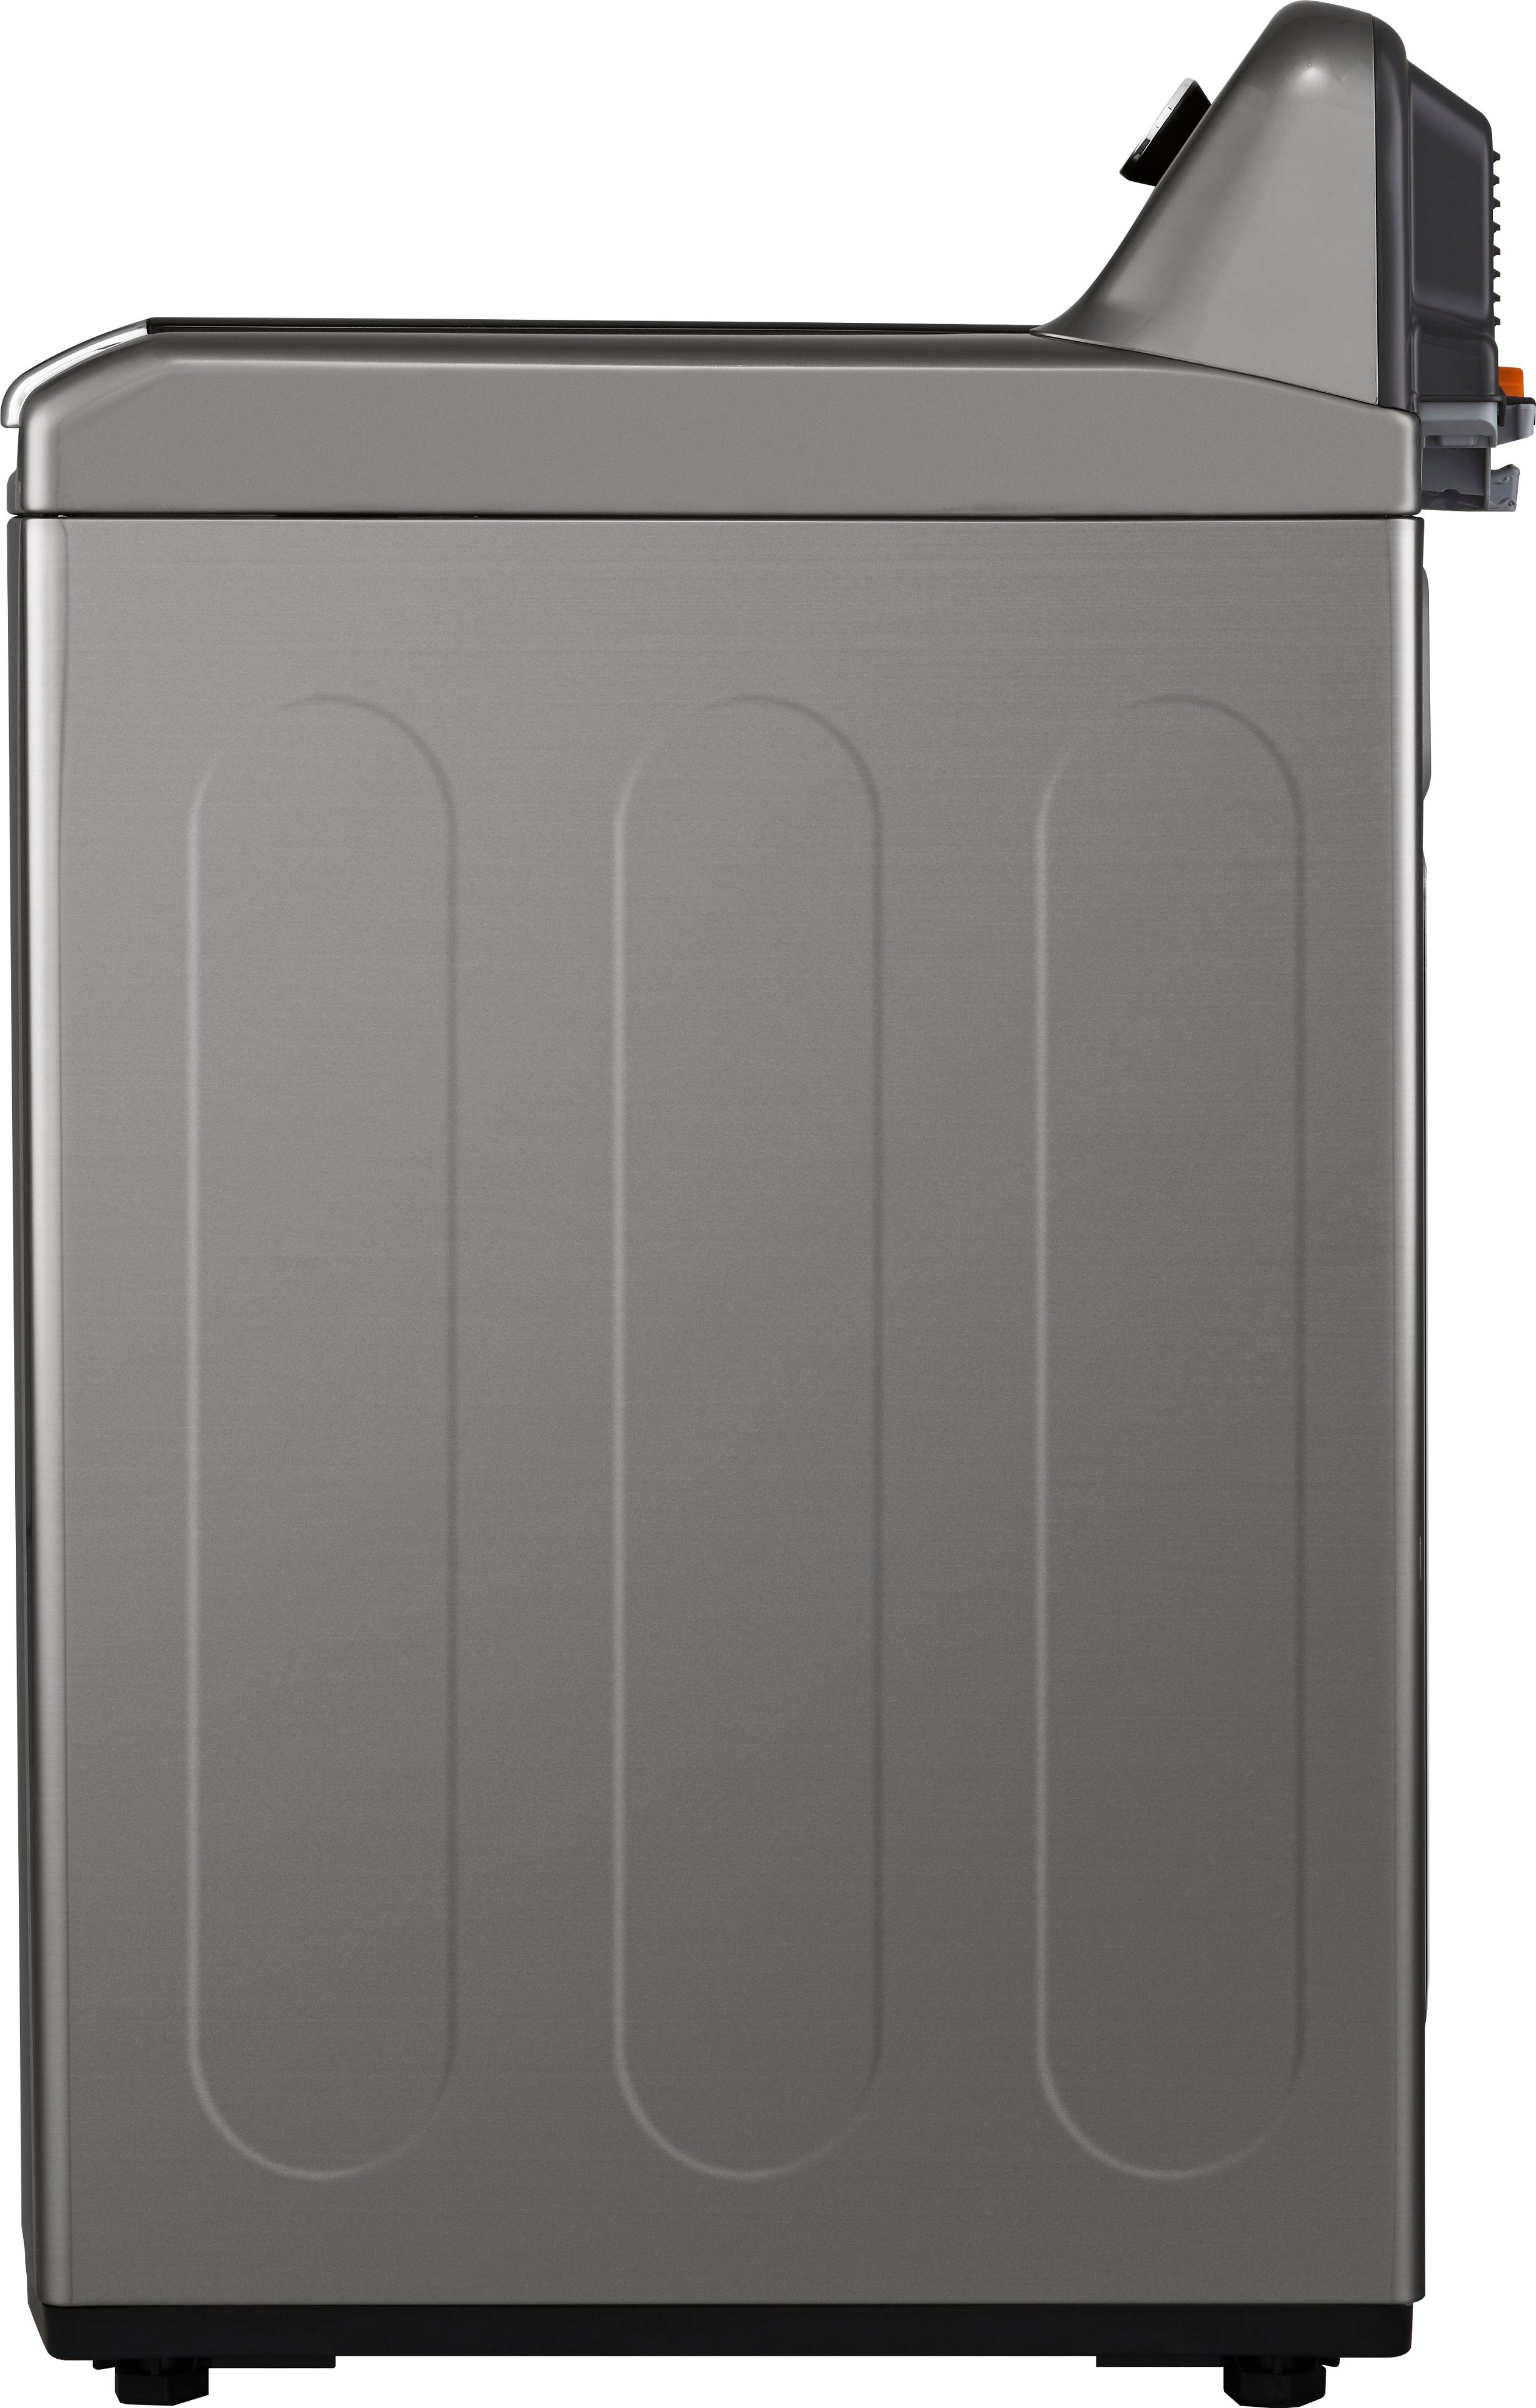 Angle View: LG - 5.3 Cu. Ft. High-Efficiency Smart Top Load Washer with 4-Way Agitator and TurboWash3D - Graphite Steel